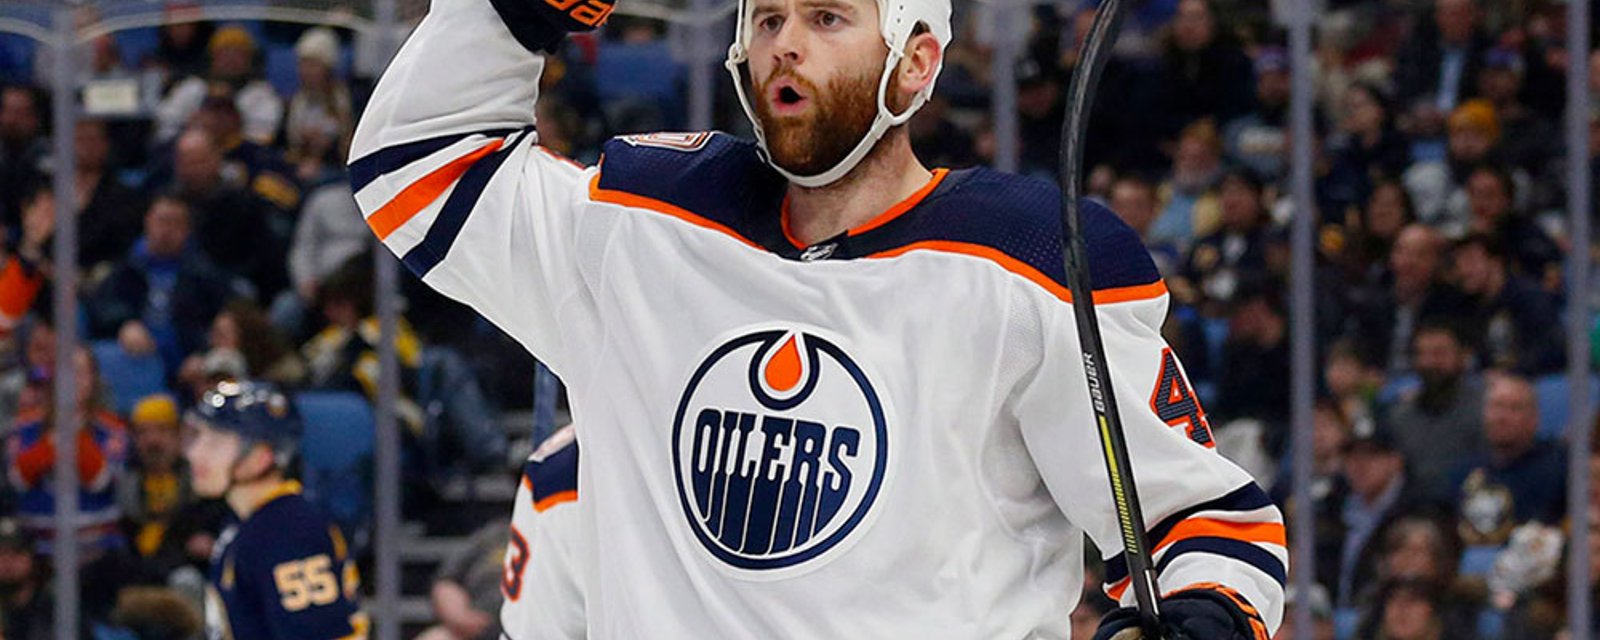 Kassian signs new contract with Oilers just hours ahead of Battle of Alberta